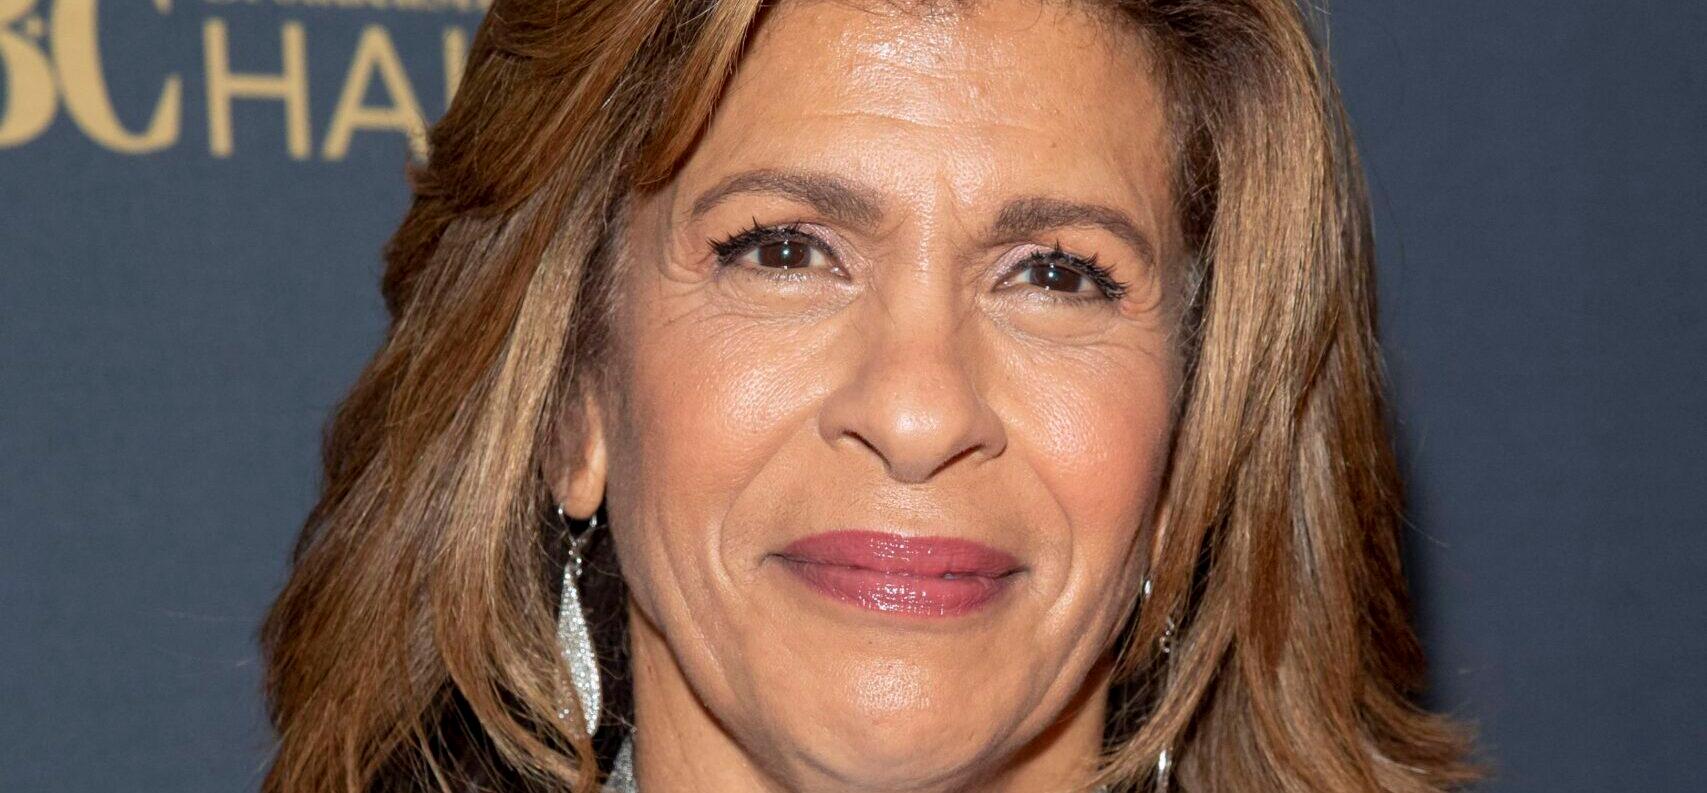 Hoda Kotb Suffers 'Medical Emergency' During The 'Today' Show